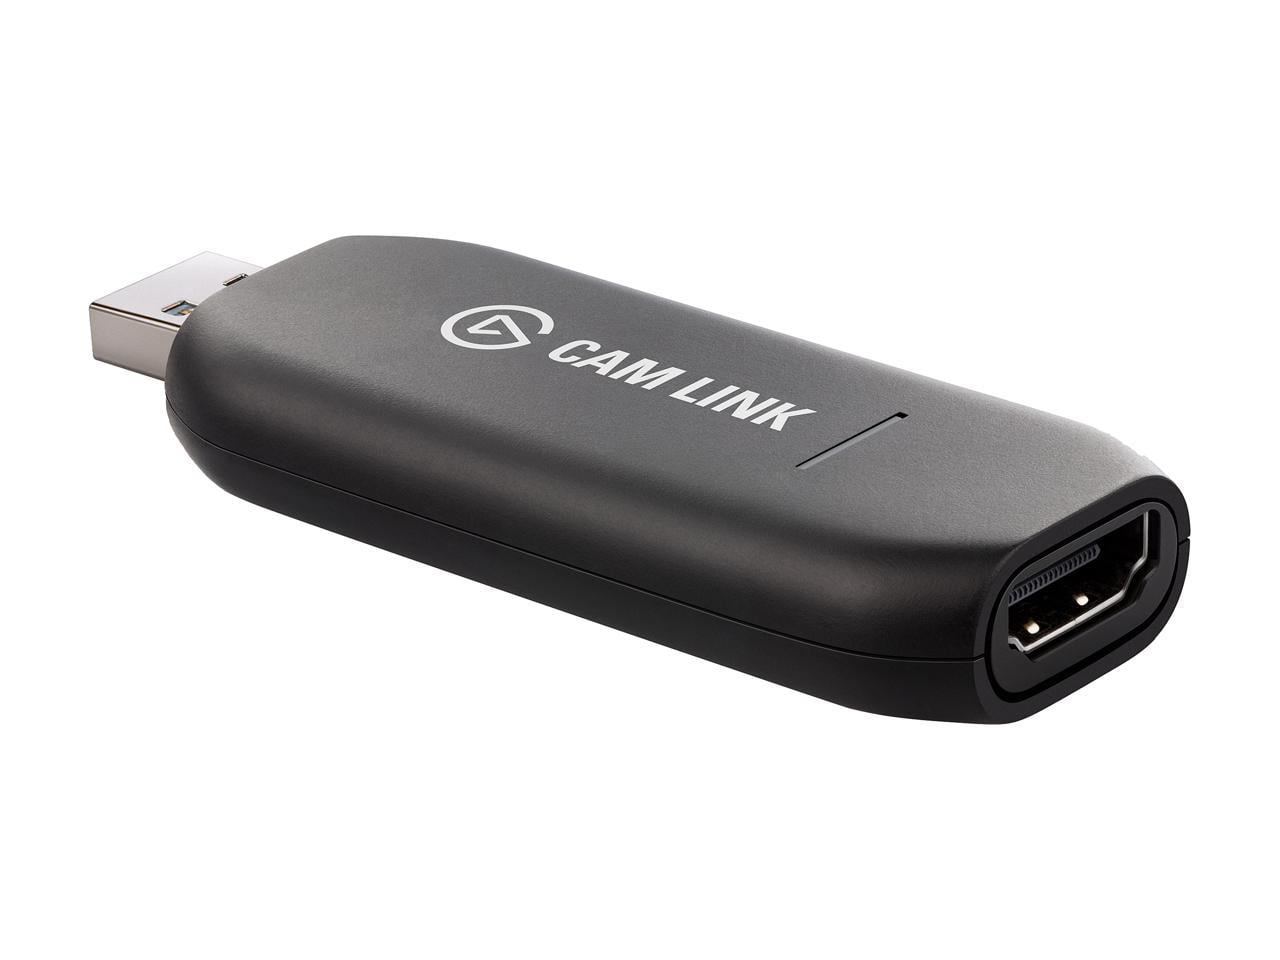 Elgato Cam Link 4K - HDMI to USB 3.0 Camera Connector, Broadcast Live and  Record in 1080p60 or 4K at 30 fps via a Compatible DSLR, Camcorder or  Action 